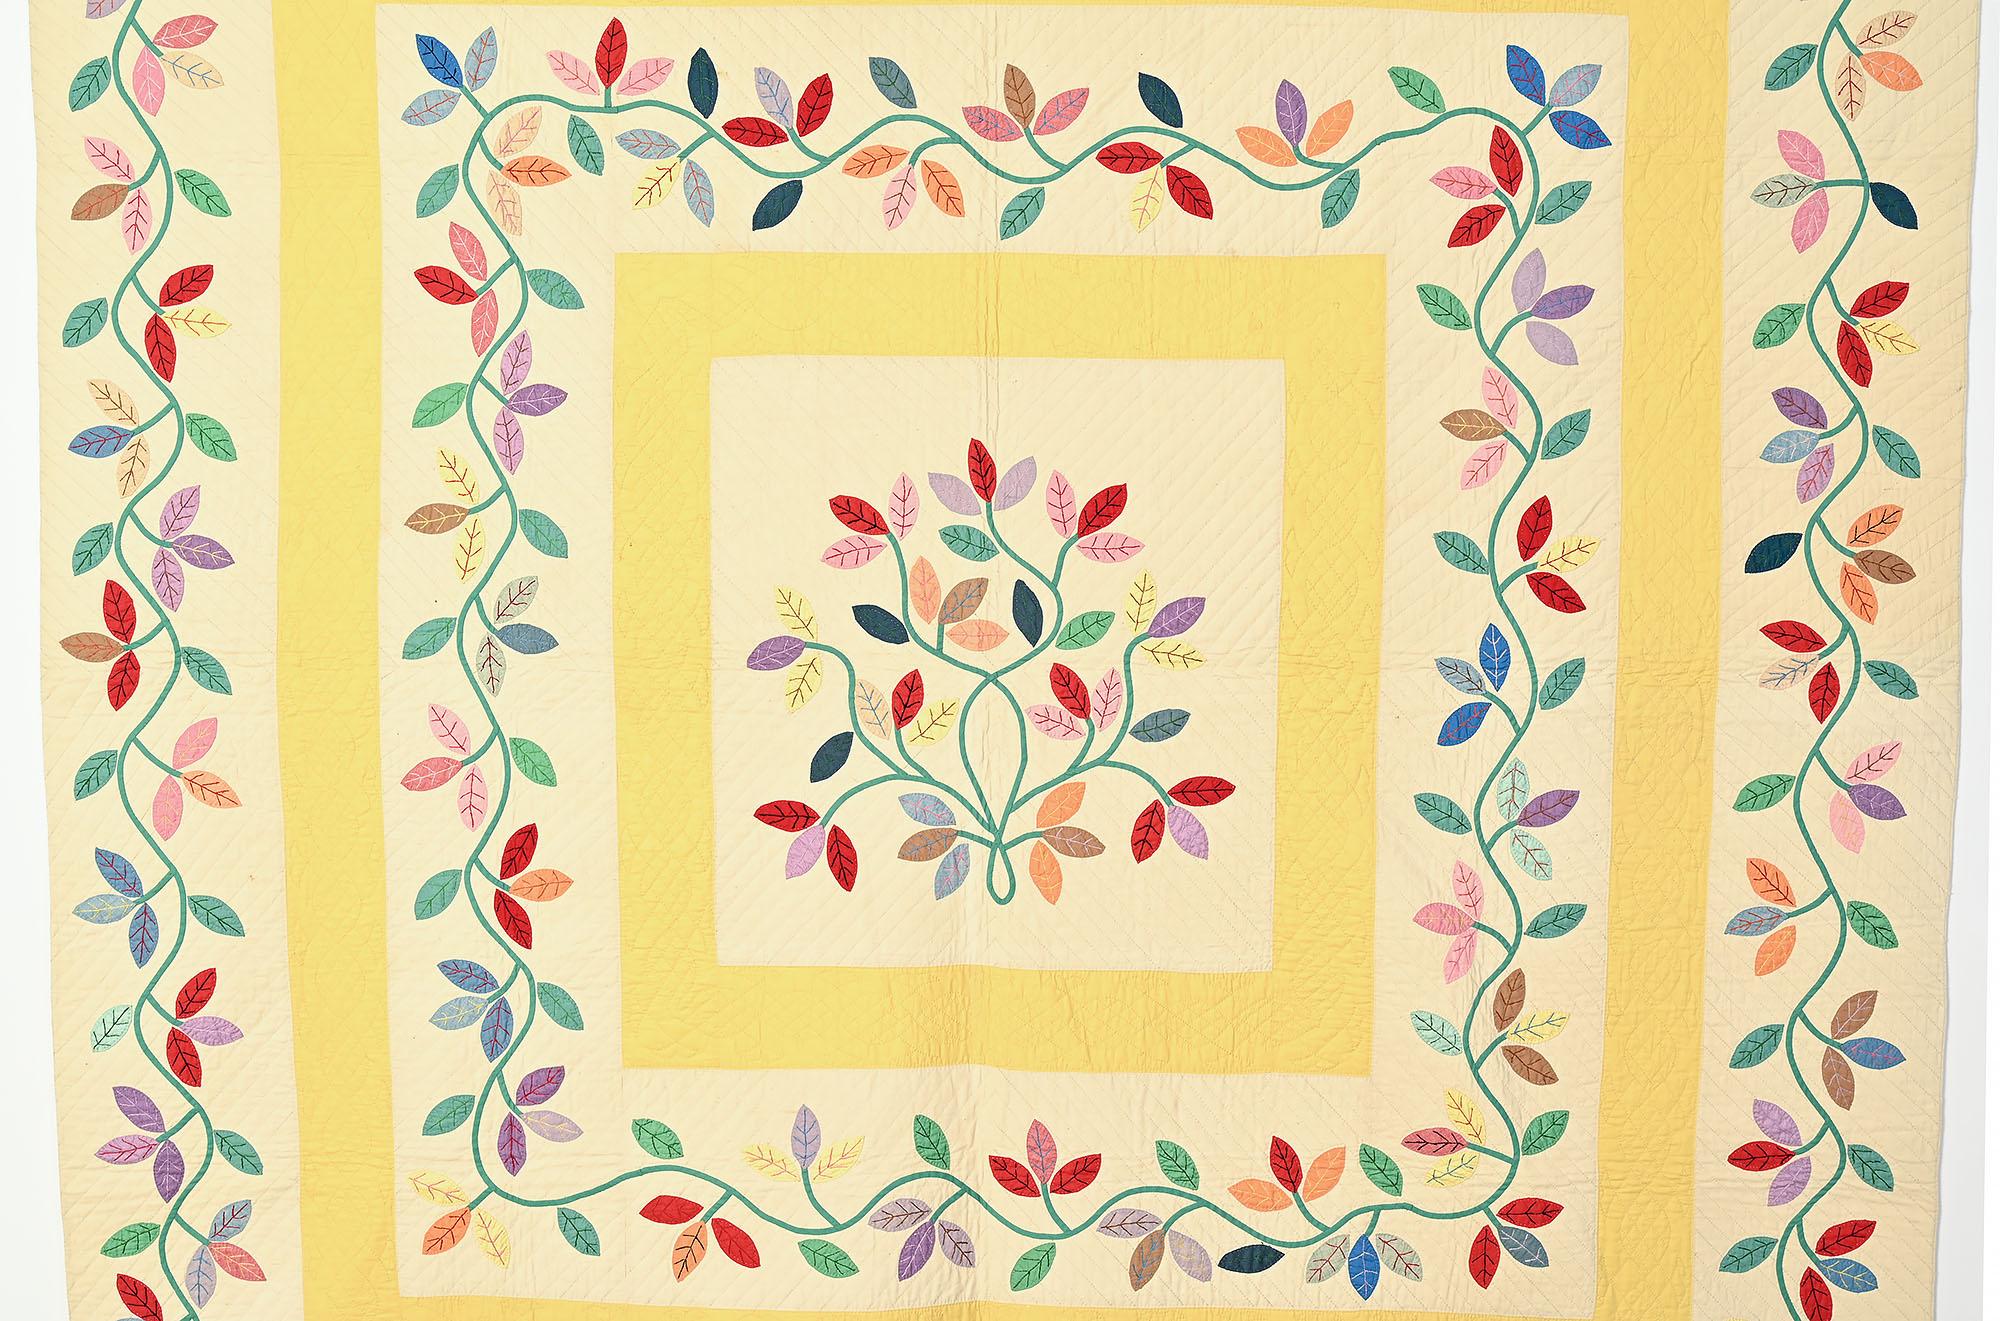 Although the name of this antique quilt pattern is Autumn Leaves, the choice of colors used here virtually screams Spring. A bouquet of flowers or leaves fills the center panel. Two frames of soft, buttery yellow surround two rows of undulating